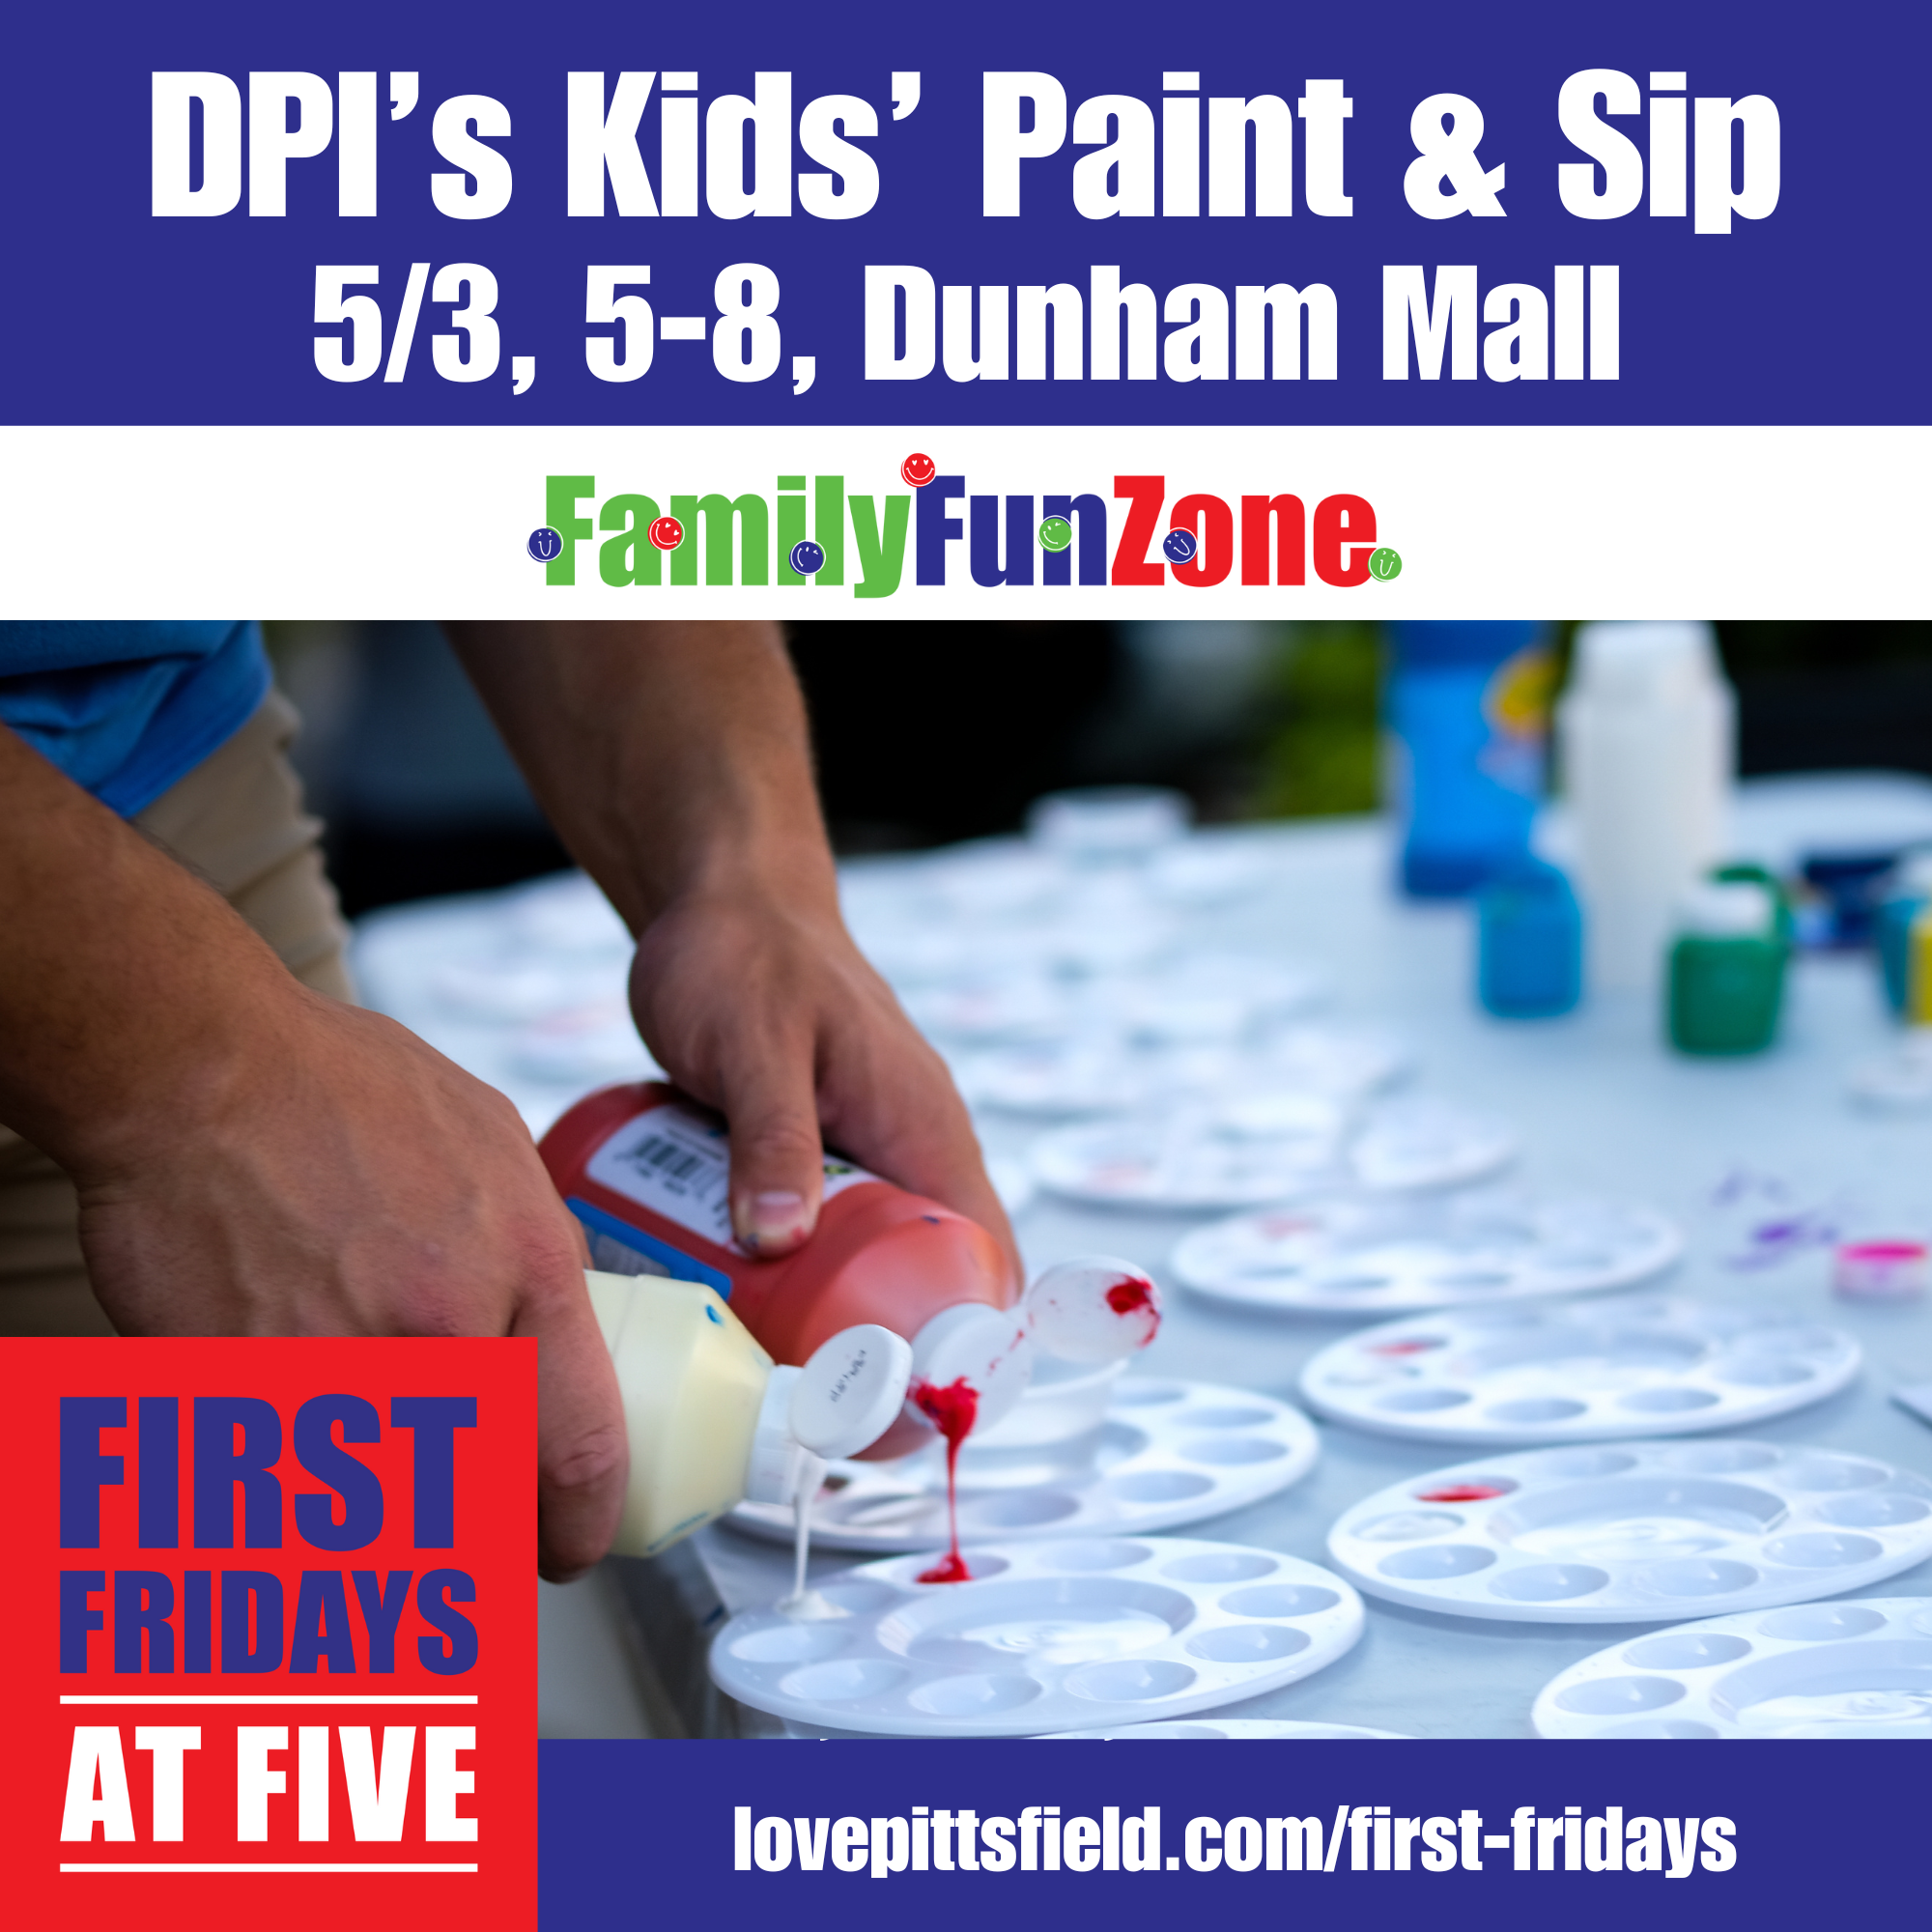 Free Kids’ Paint & Sip as part of the First Fridays at Five Family Fun Zone